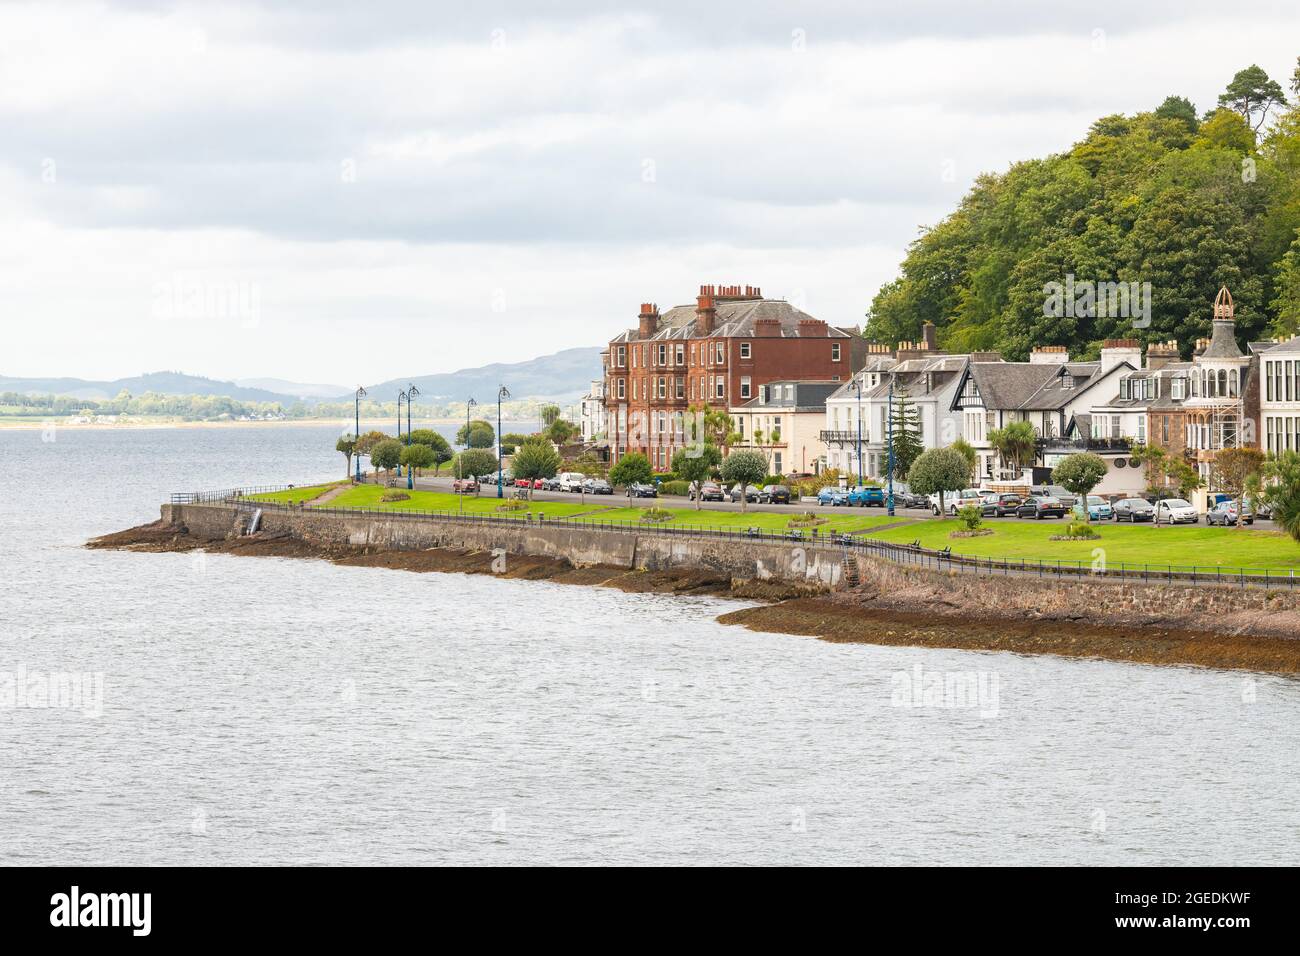 Rothesay, Battery Place, East Bay, Isle of Bute, Argyll and Bute, Scotland, UK Stock Photo